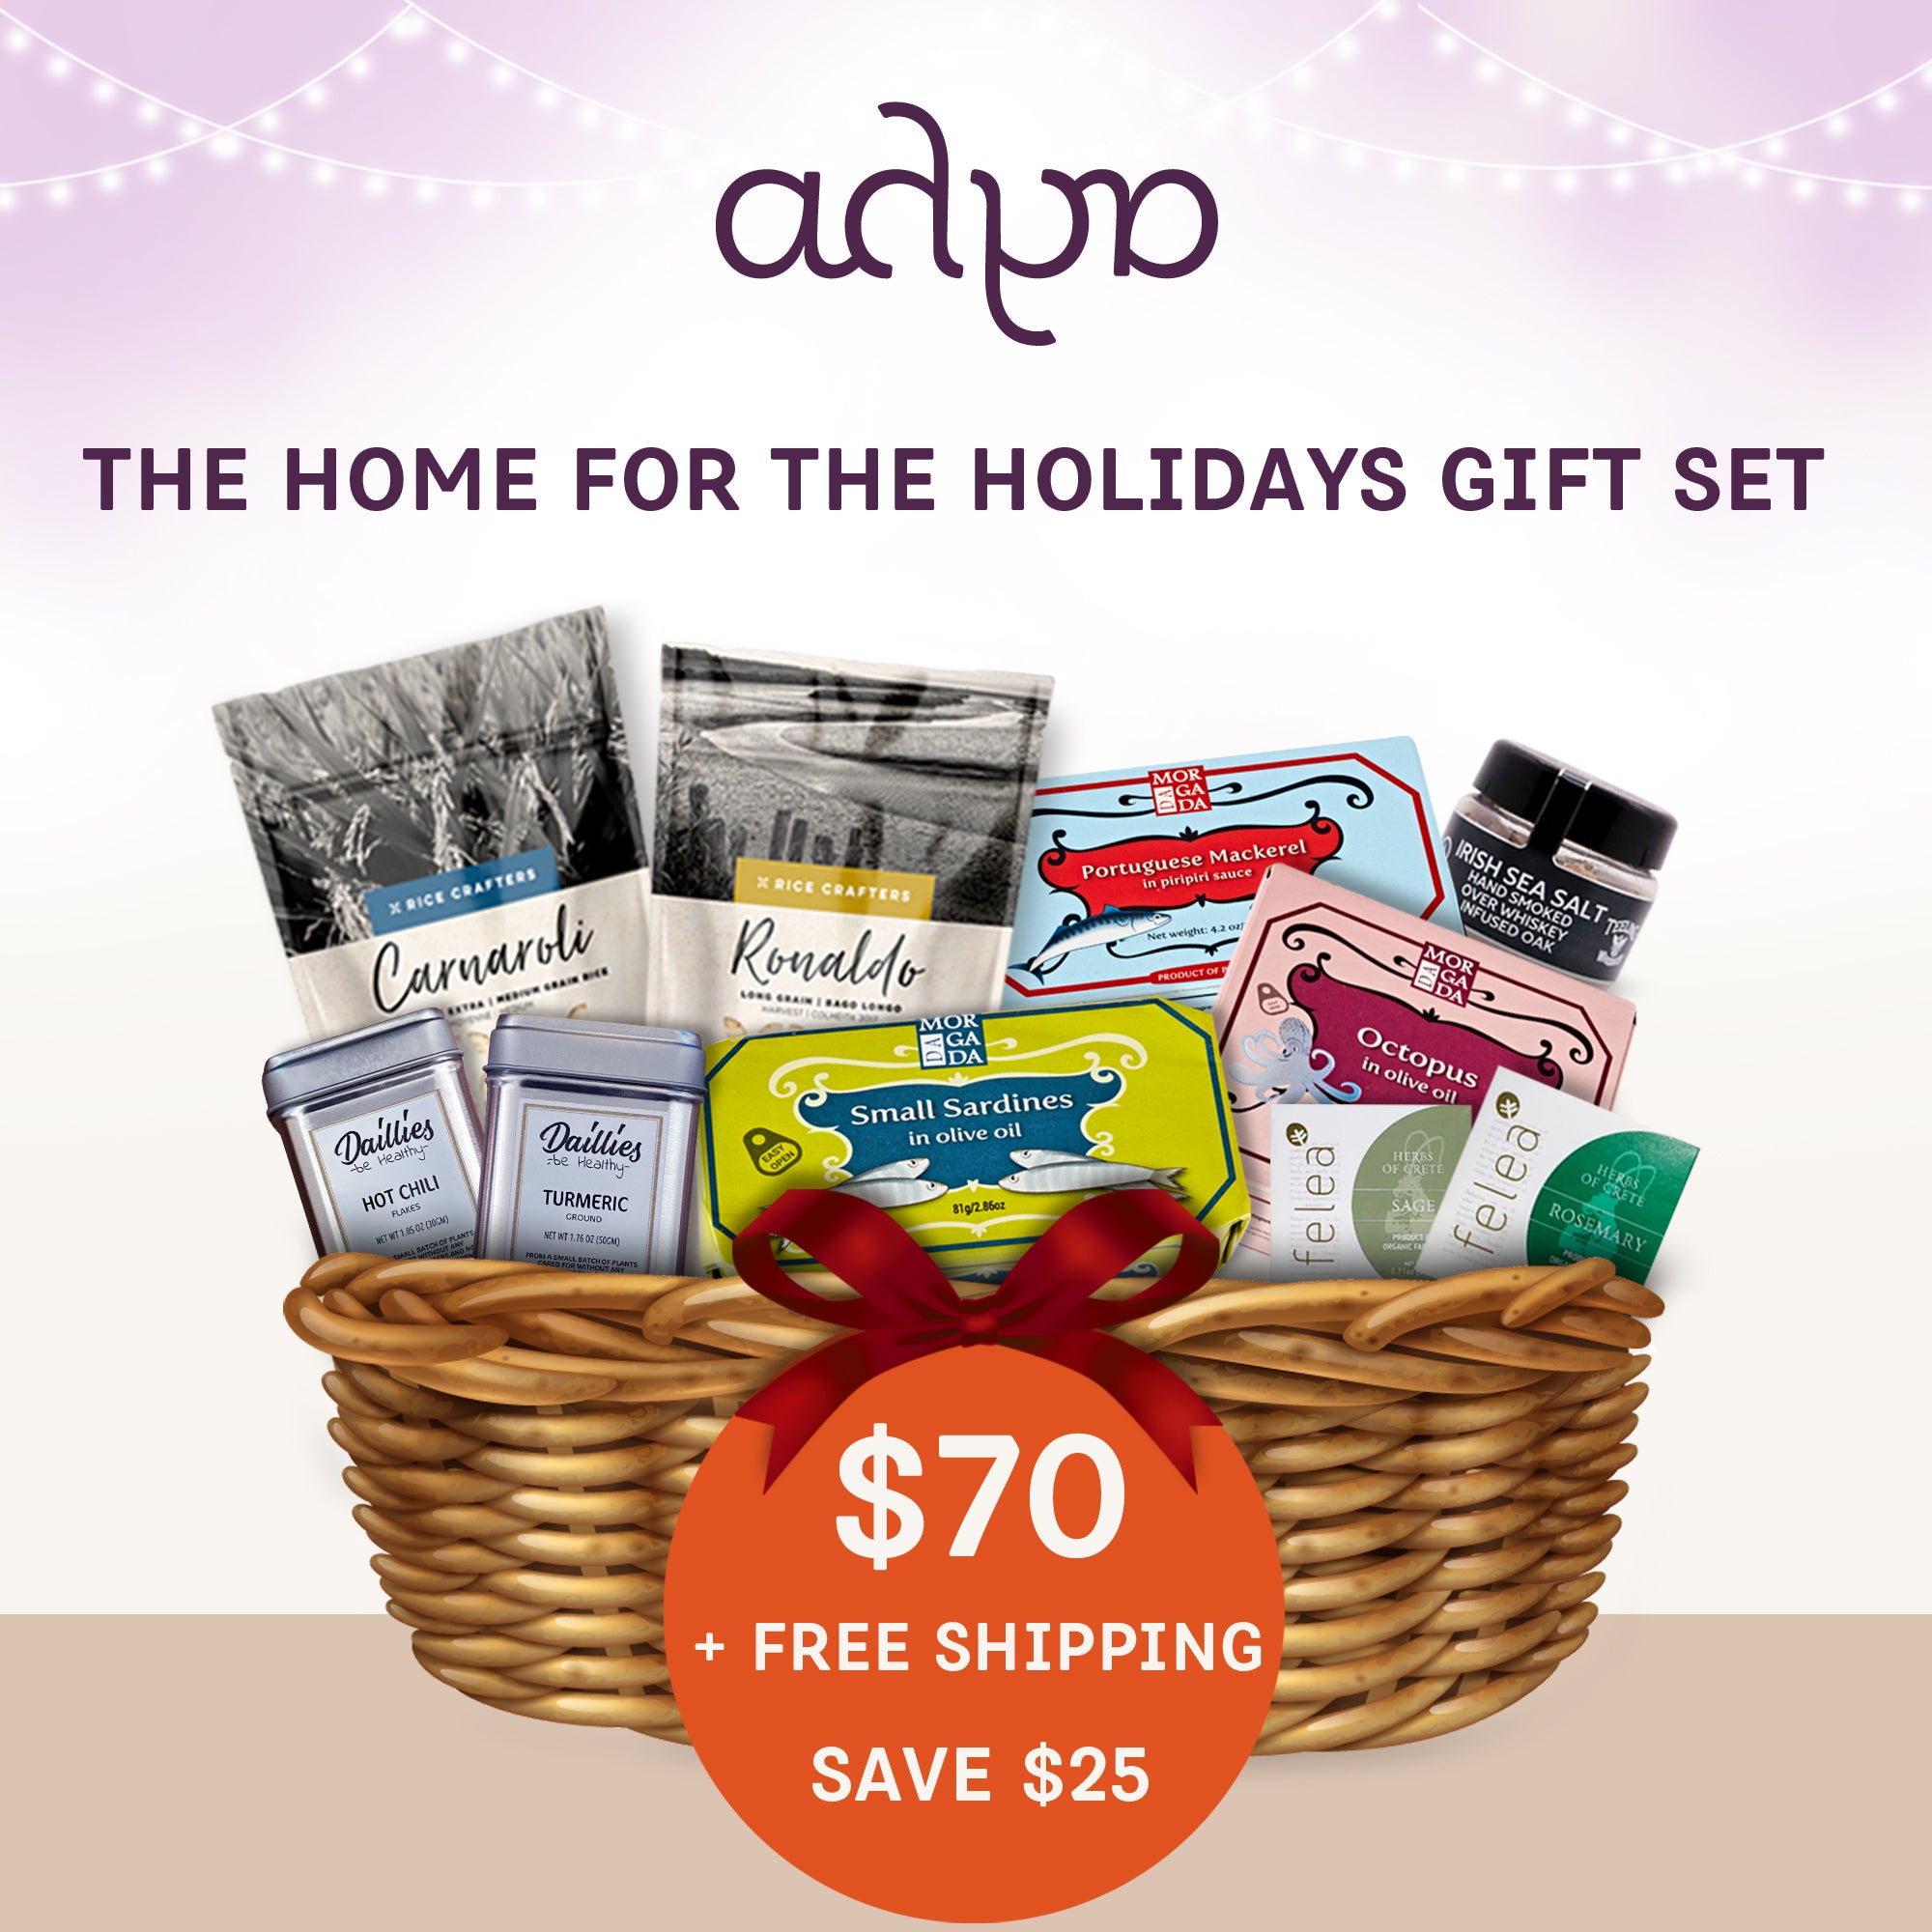 The Home for the Holidays Gift Set